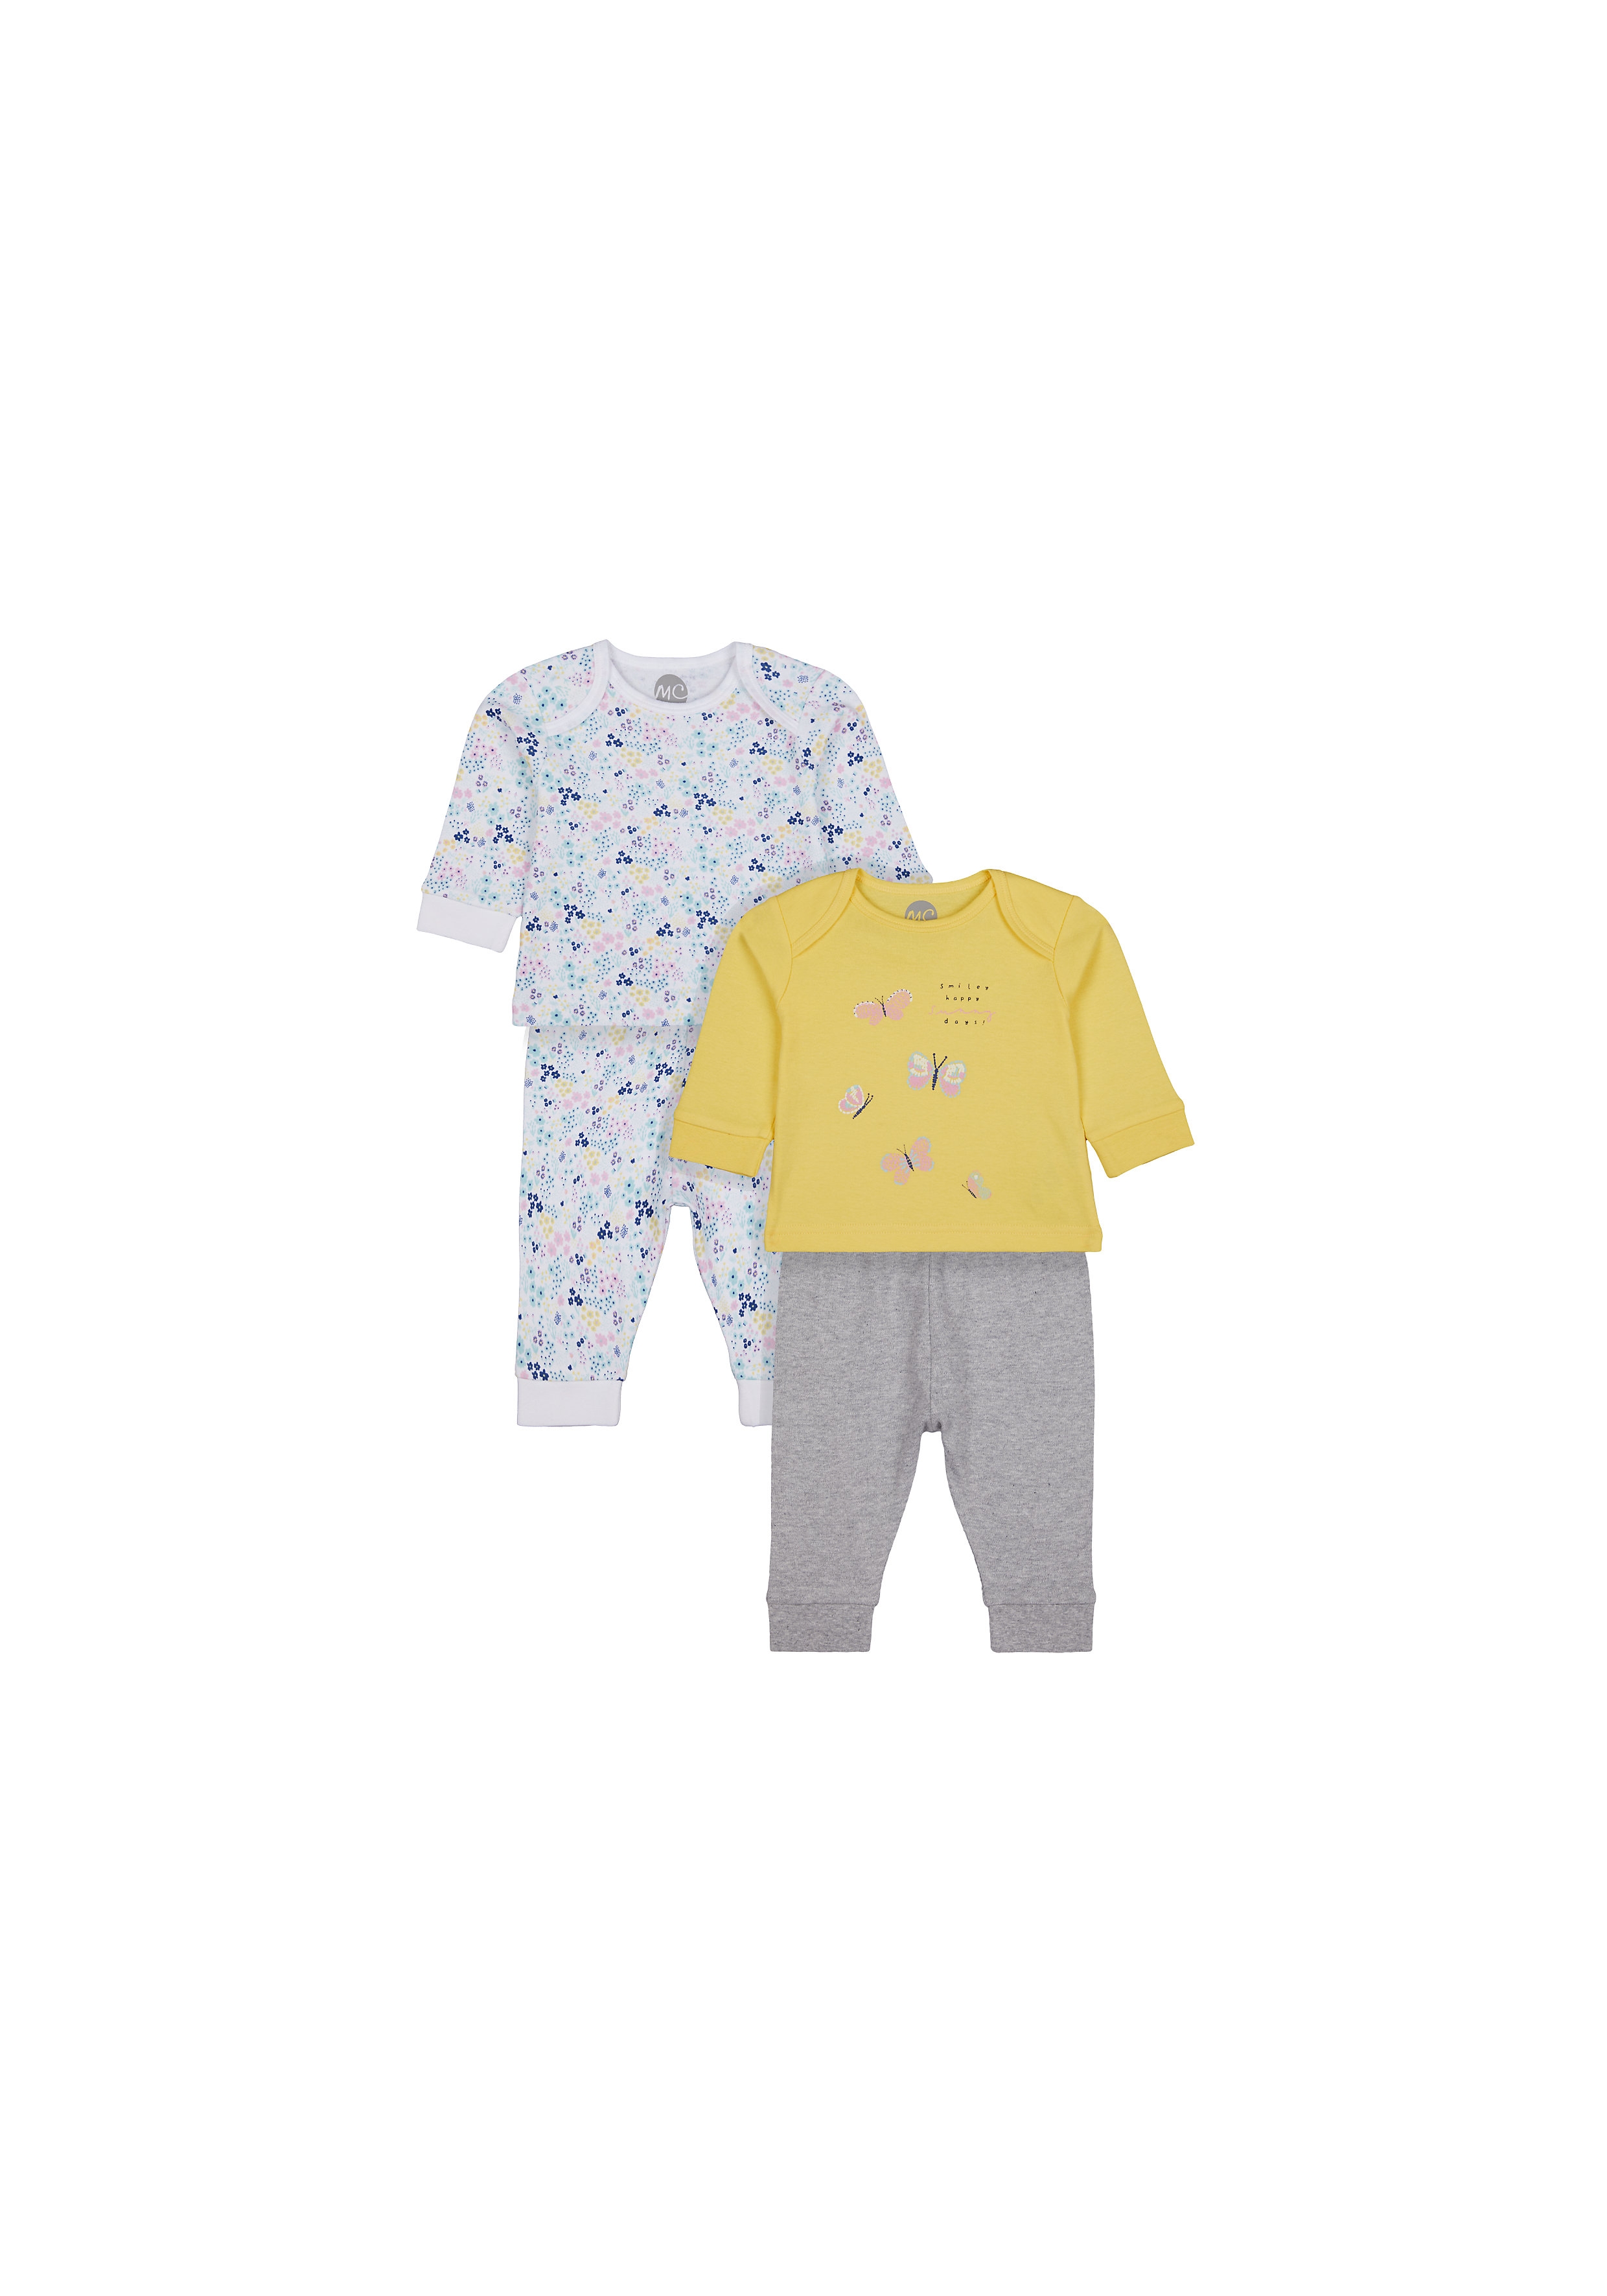 Girls Full Sleeves Pyjamas Floral And Butterfly Print - Pack Of 2 - Yellow White